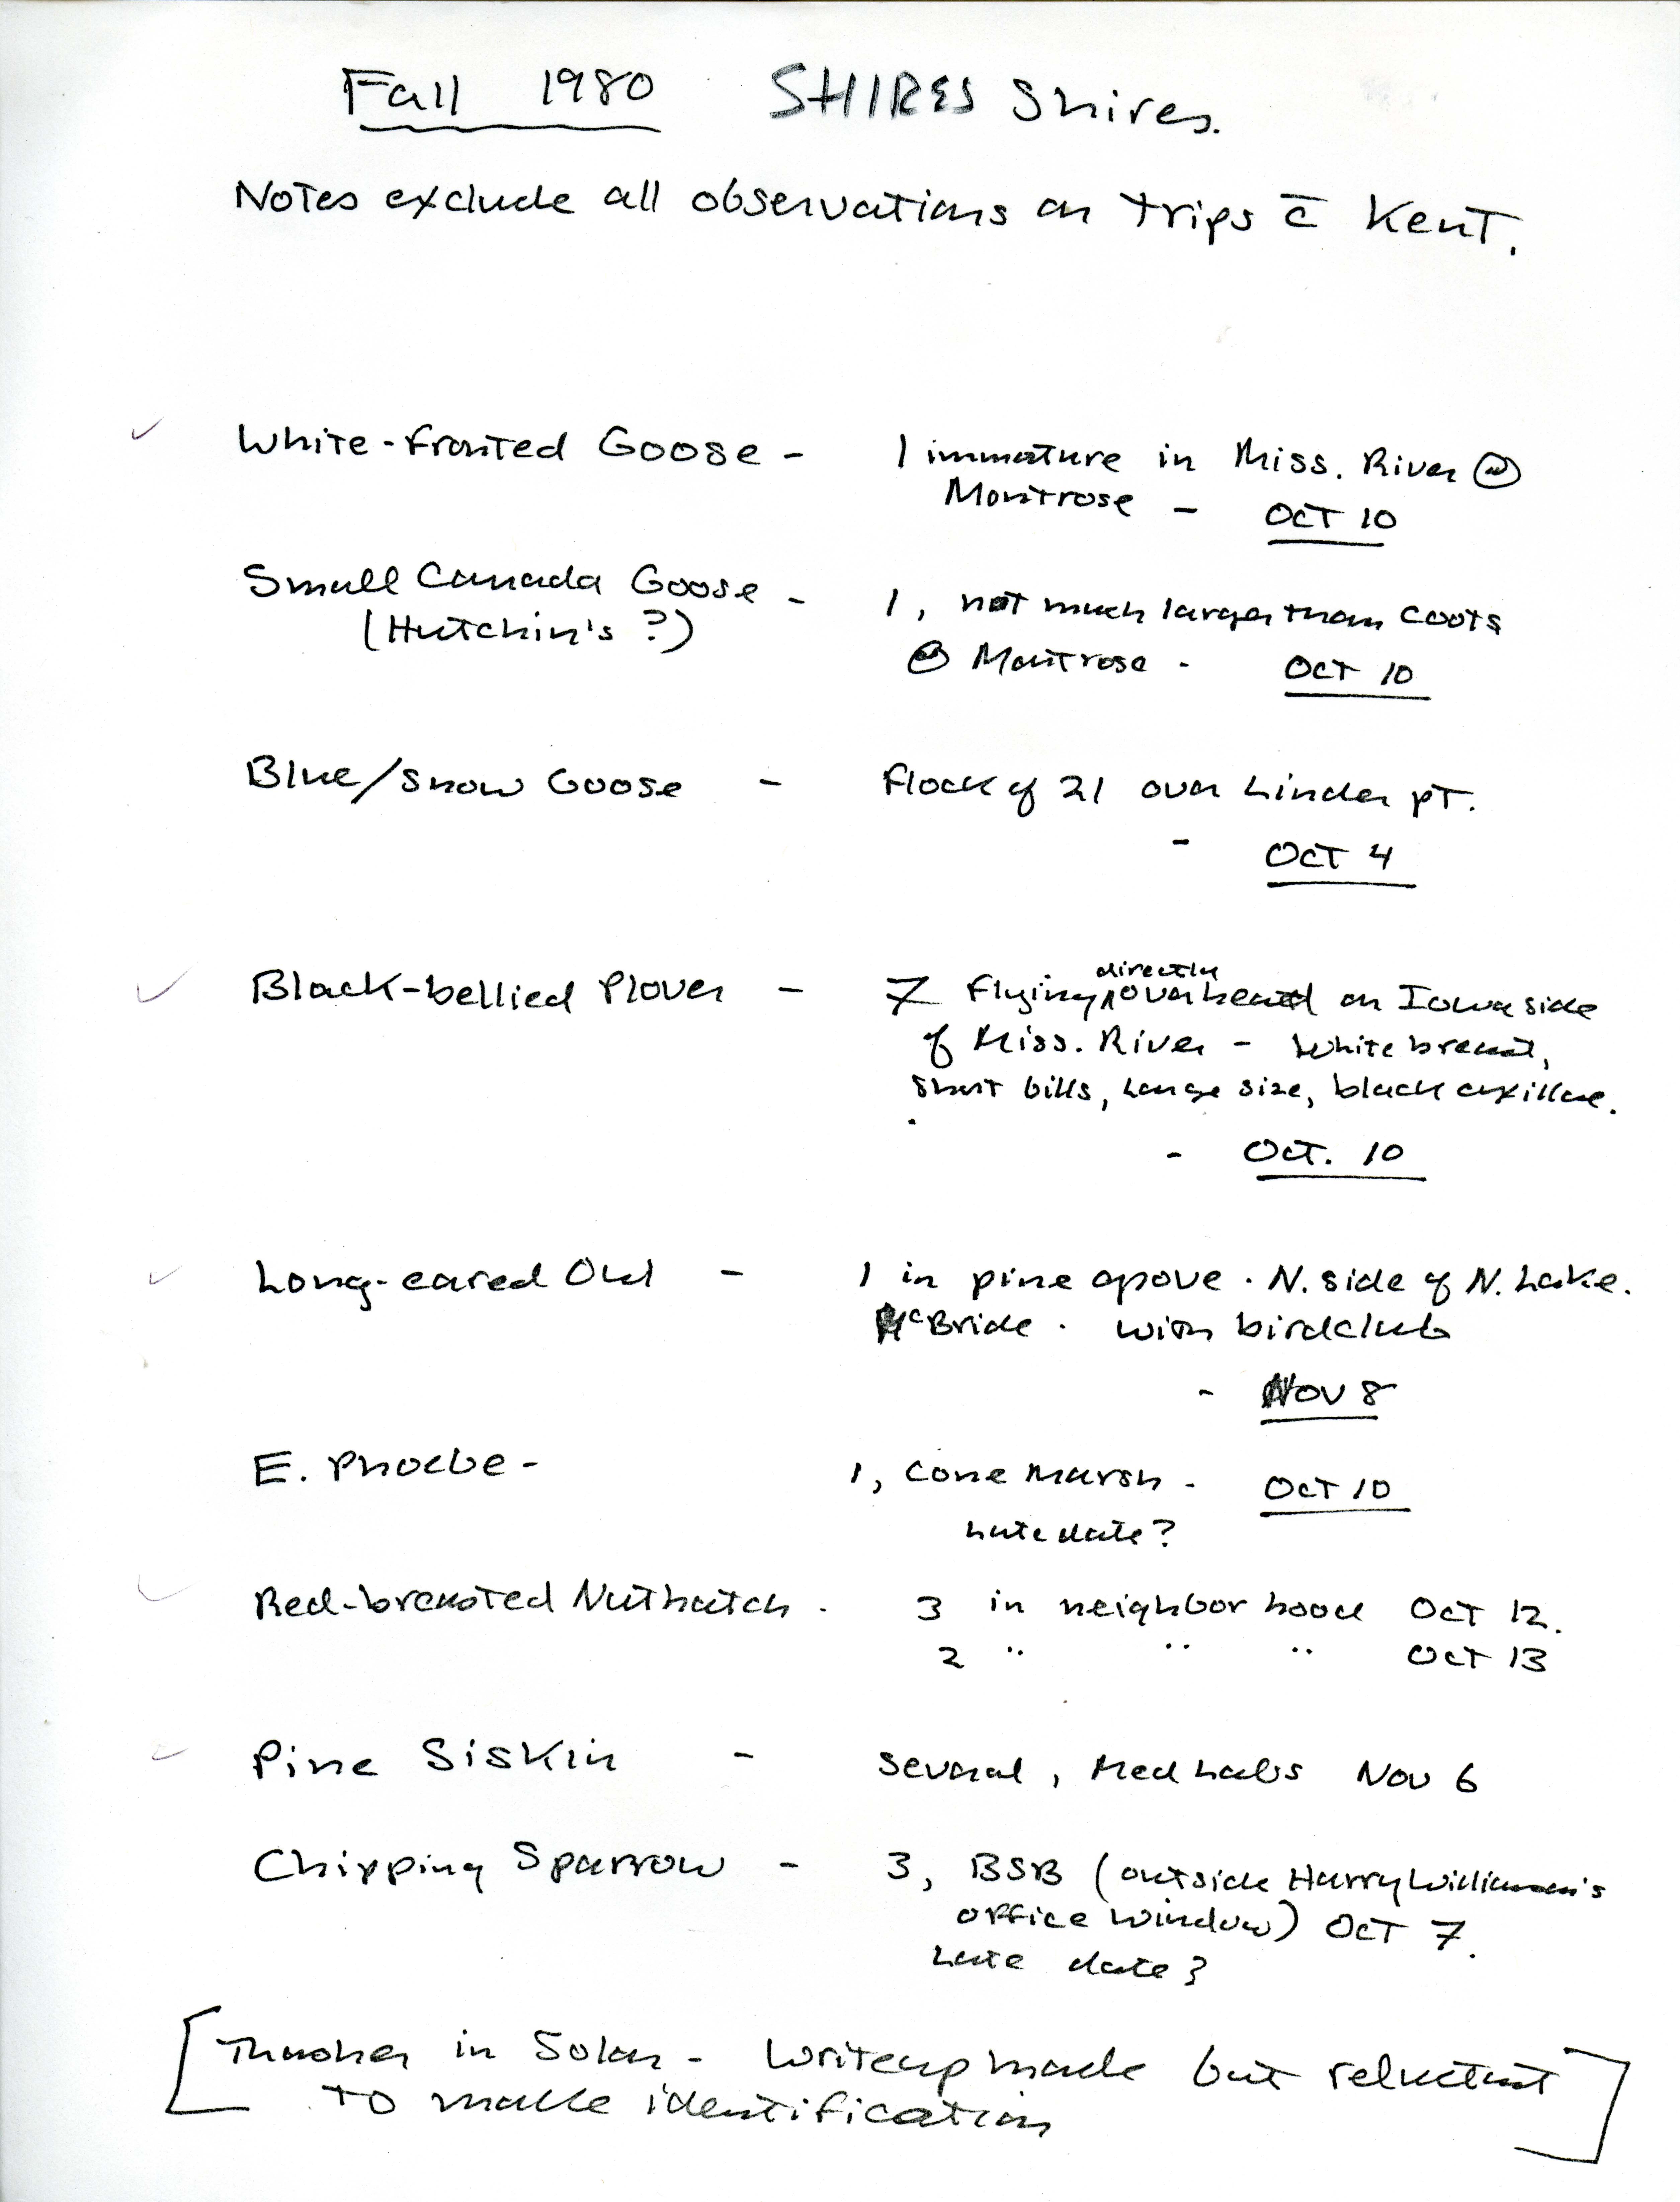 Fall 1980 notes compiled by Thomas Shires